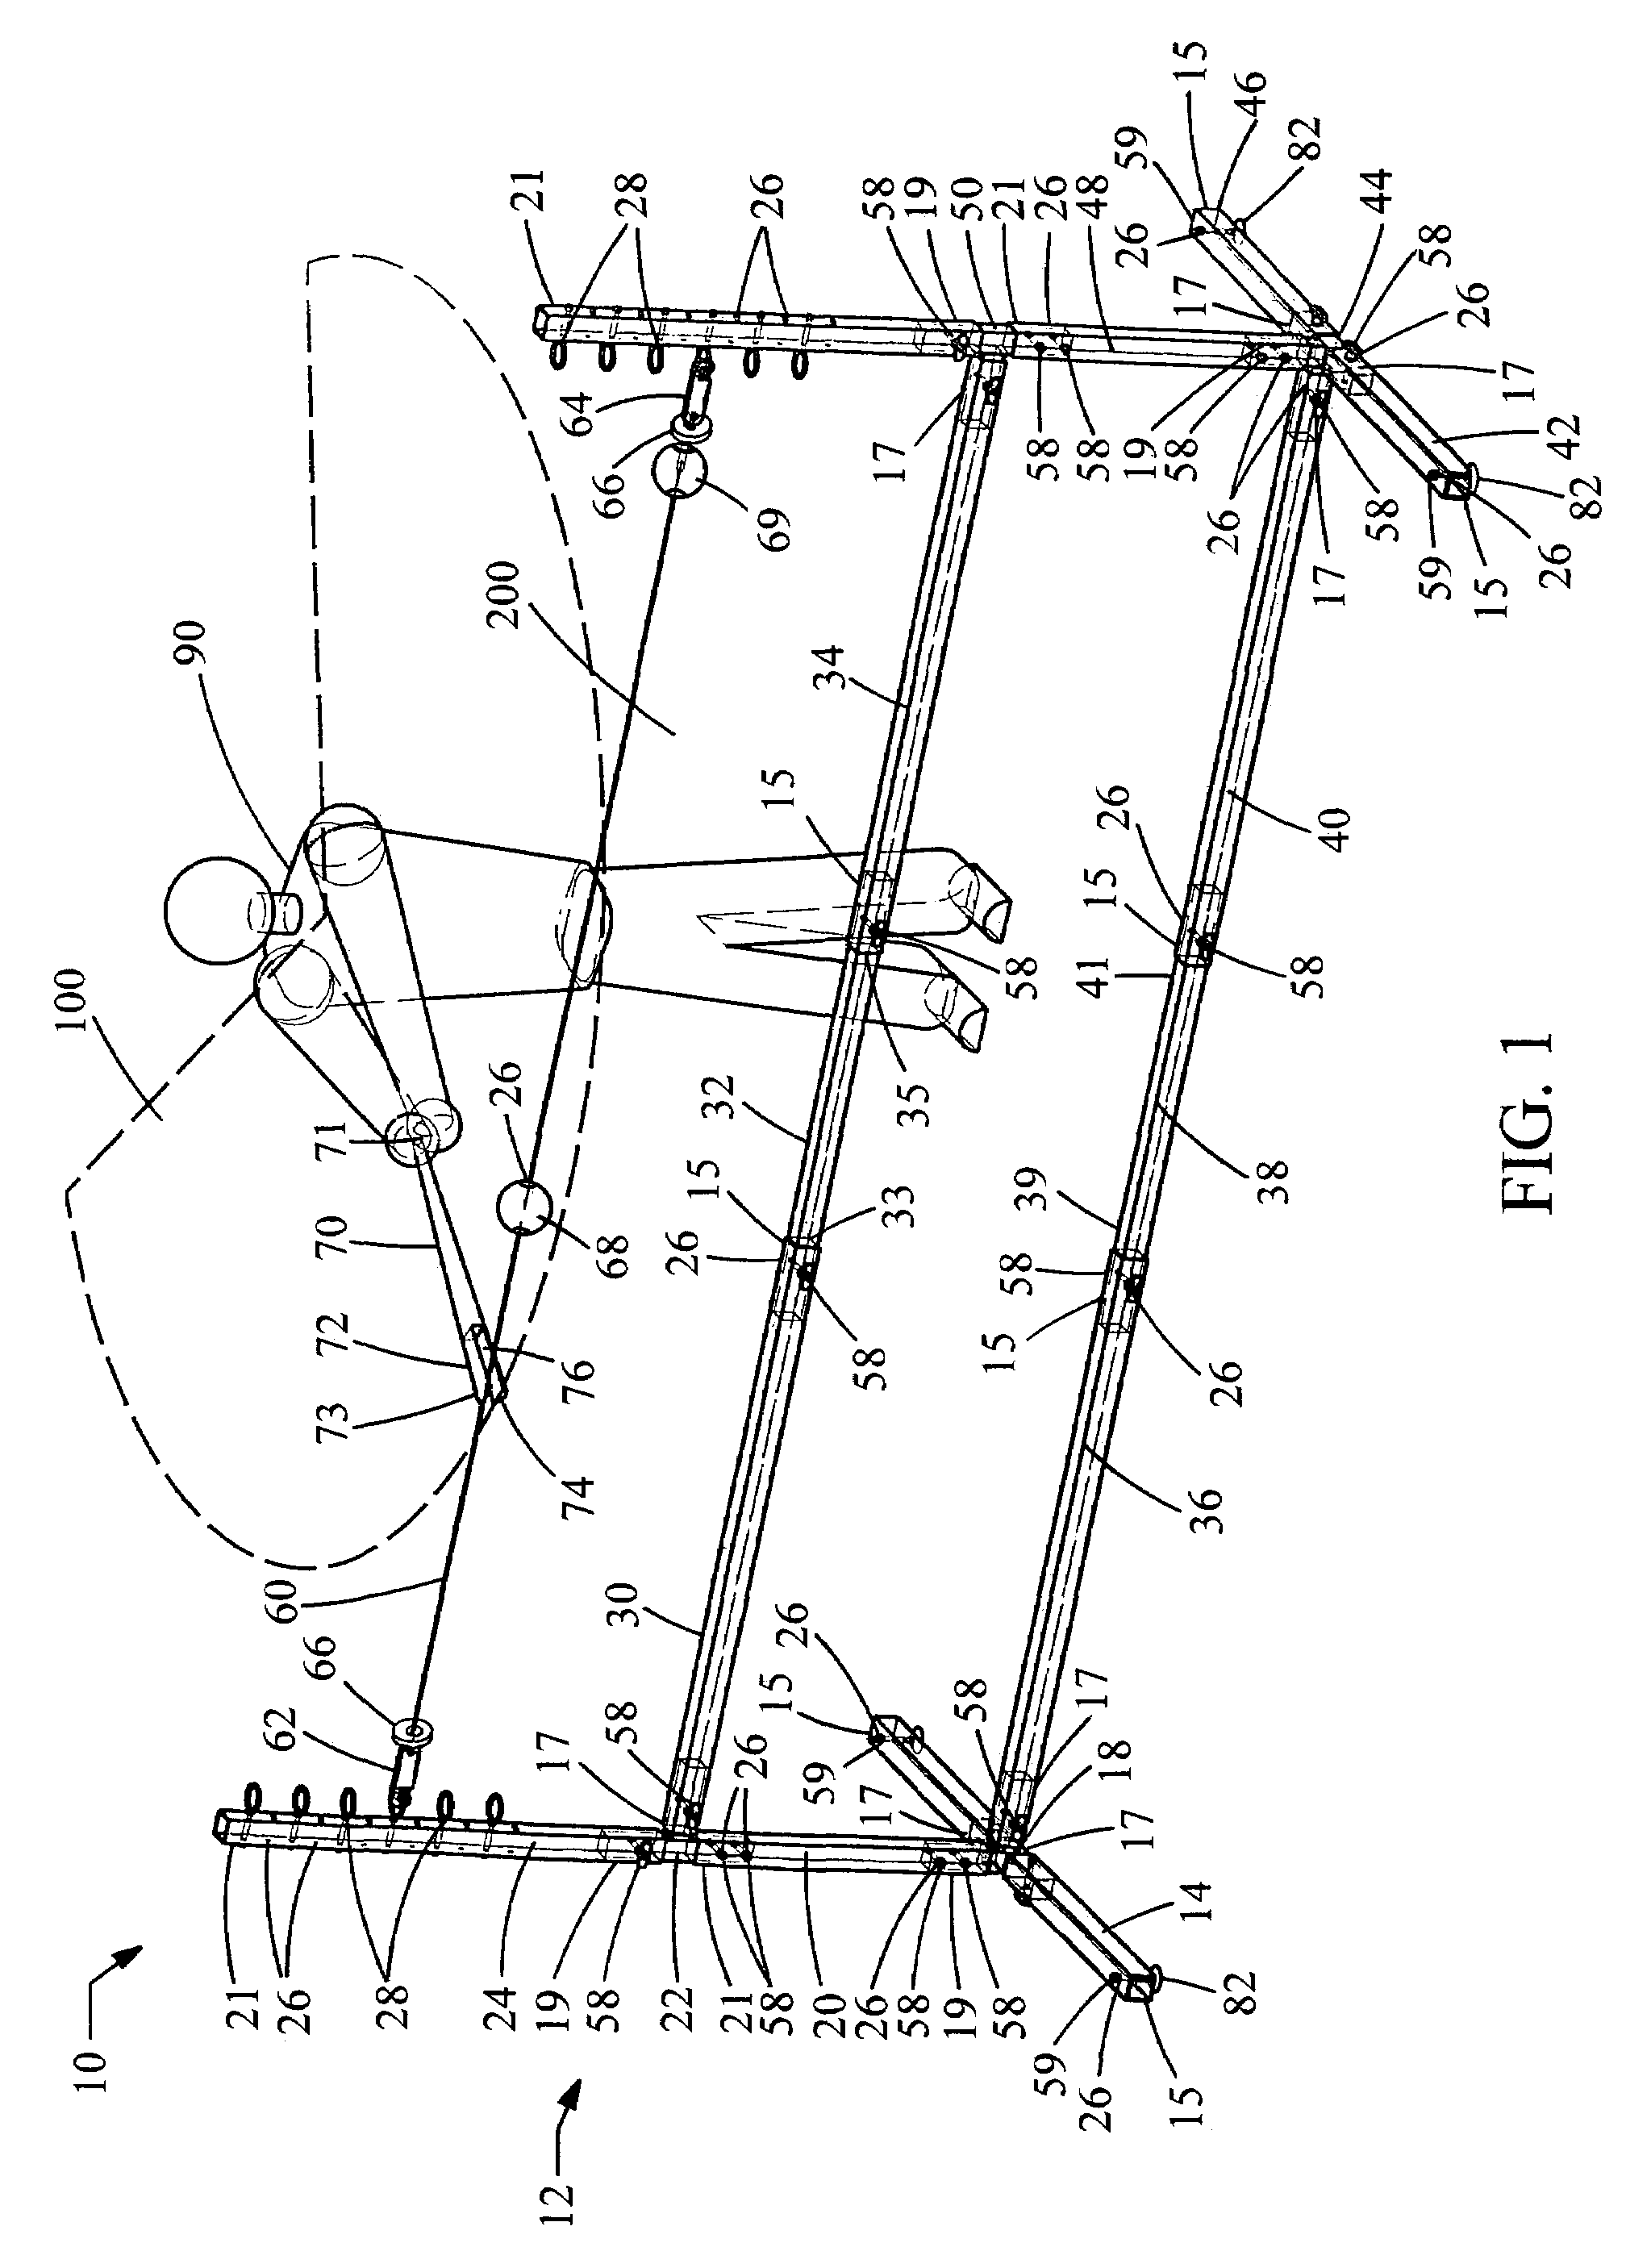 Sports training assembly and a method for using the same